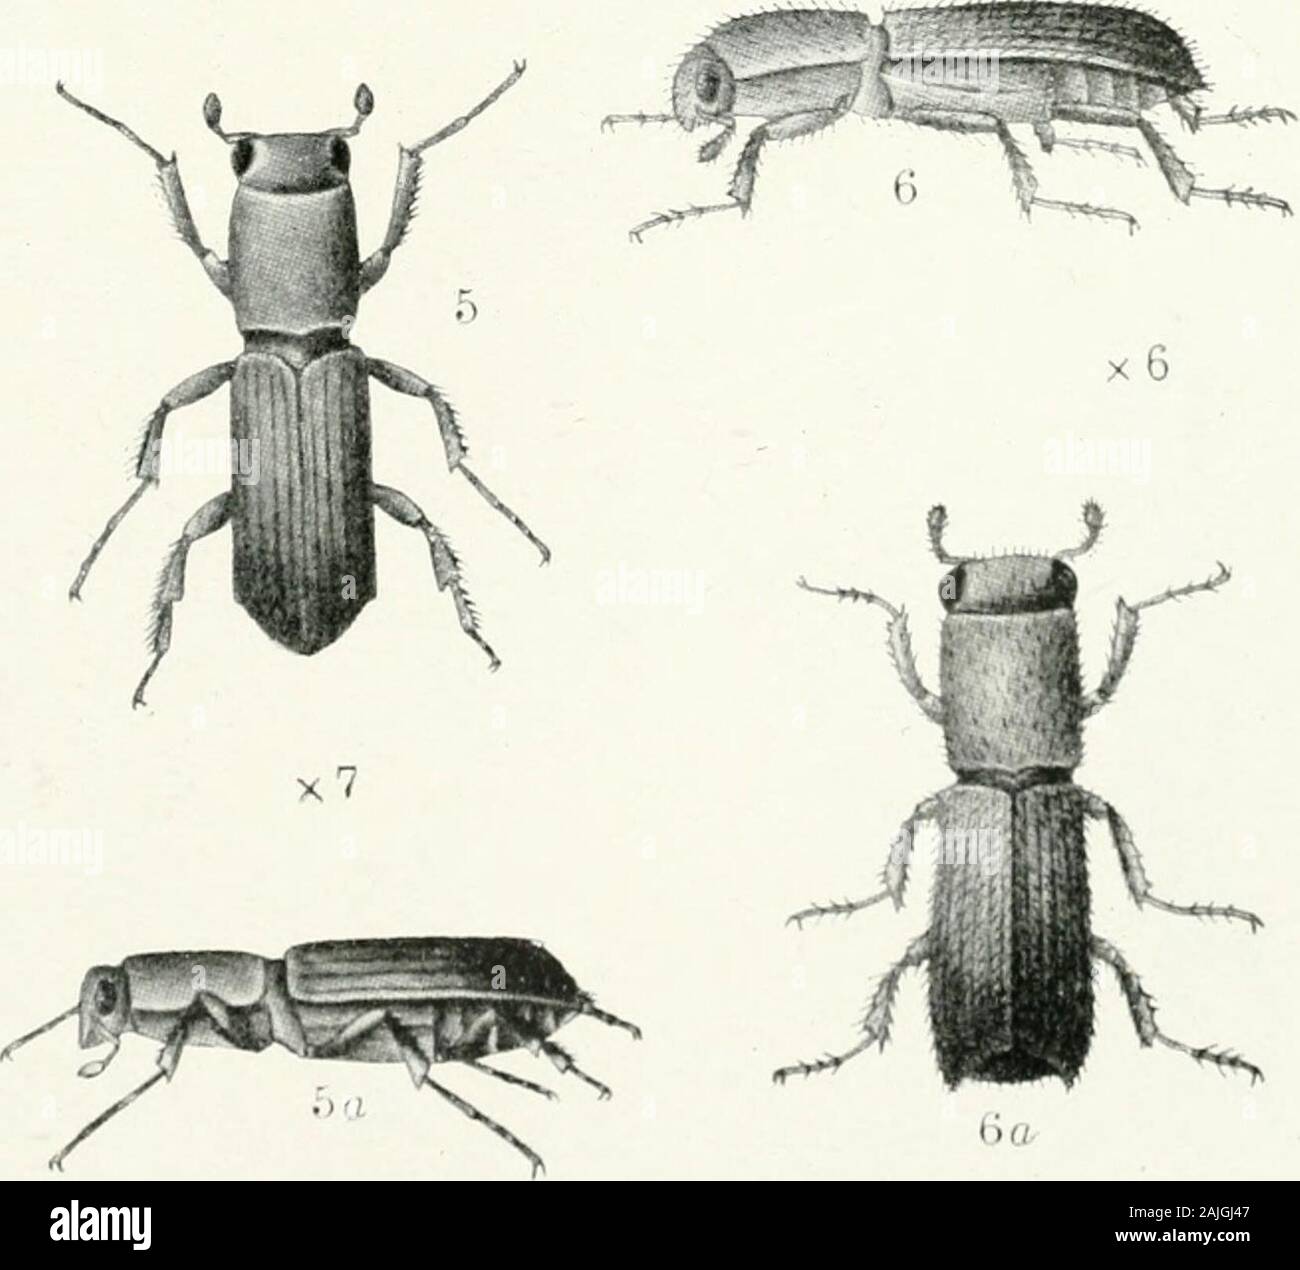 Indian forest insects of economic importance Coleoptera . 6 a Sphaerotrypes //itt-rci, Steb.— i, larva; 2, 2&lt;r, beetle; 3, egg and larval galleries. 4,40,hramesus ^/n/n//i/s, Steb. 5, 5^. Diapus impressus, Janson. 6, 6tf, Crossotarsus fainnairei,hap., var. iiilninti, Steb. FAMILY SCOLYTIDAE 495 This beetle infests the olive (Olea cuspidata) in North Baluchistan andpossibly neighbouring tracts. I found a living tree badlyLife History. infested by the insects on 9 November 1905, the femalesbeing engaged in eating out elongate vertical egg-galleries some two inches in length transversely acros Stock Photo